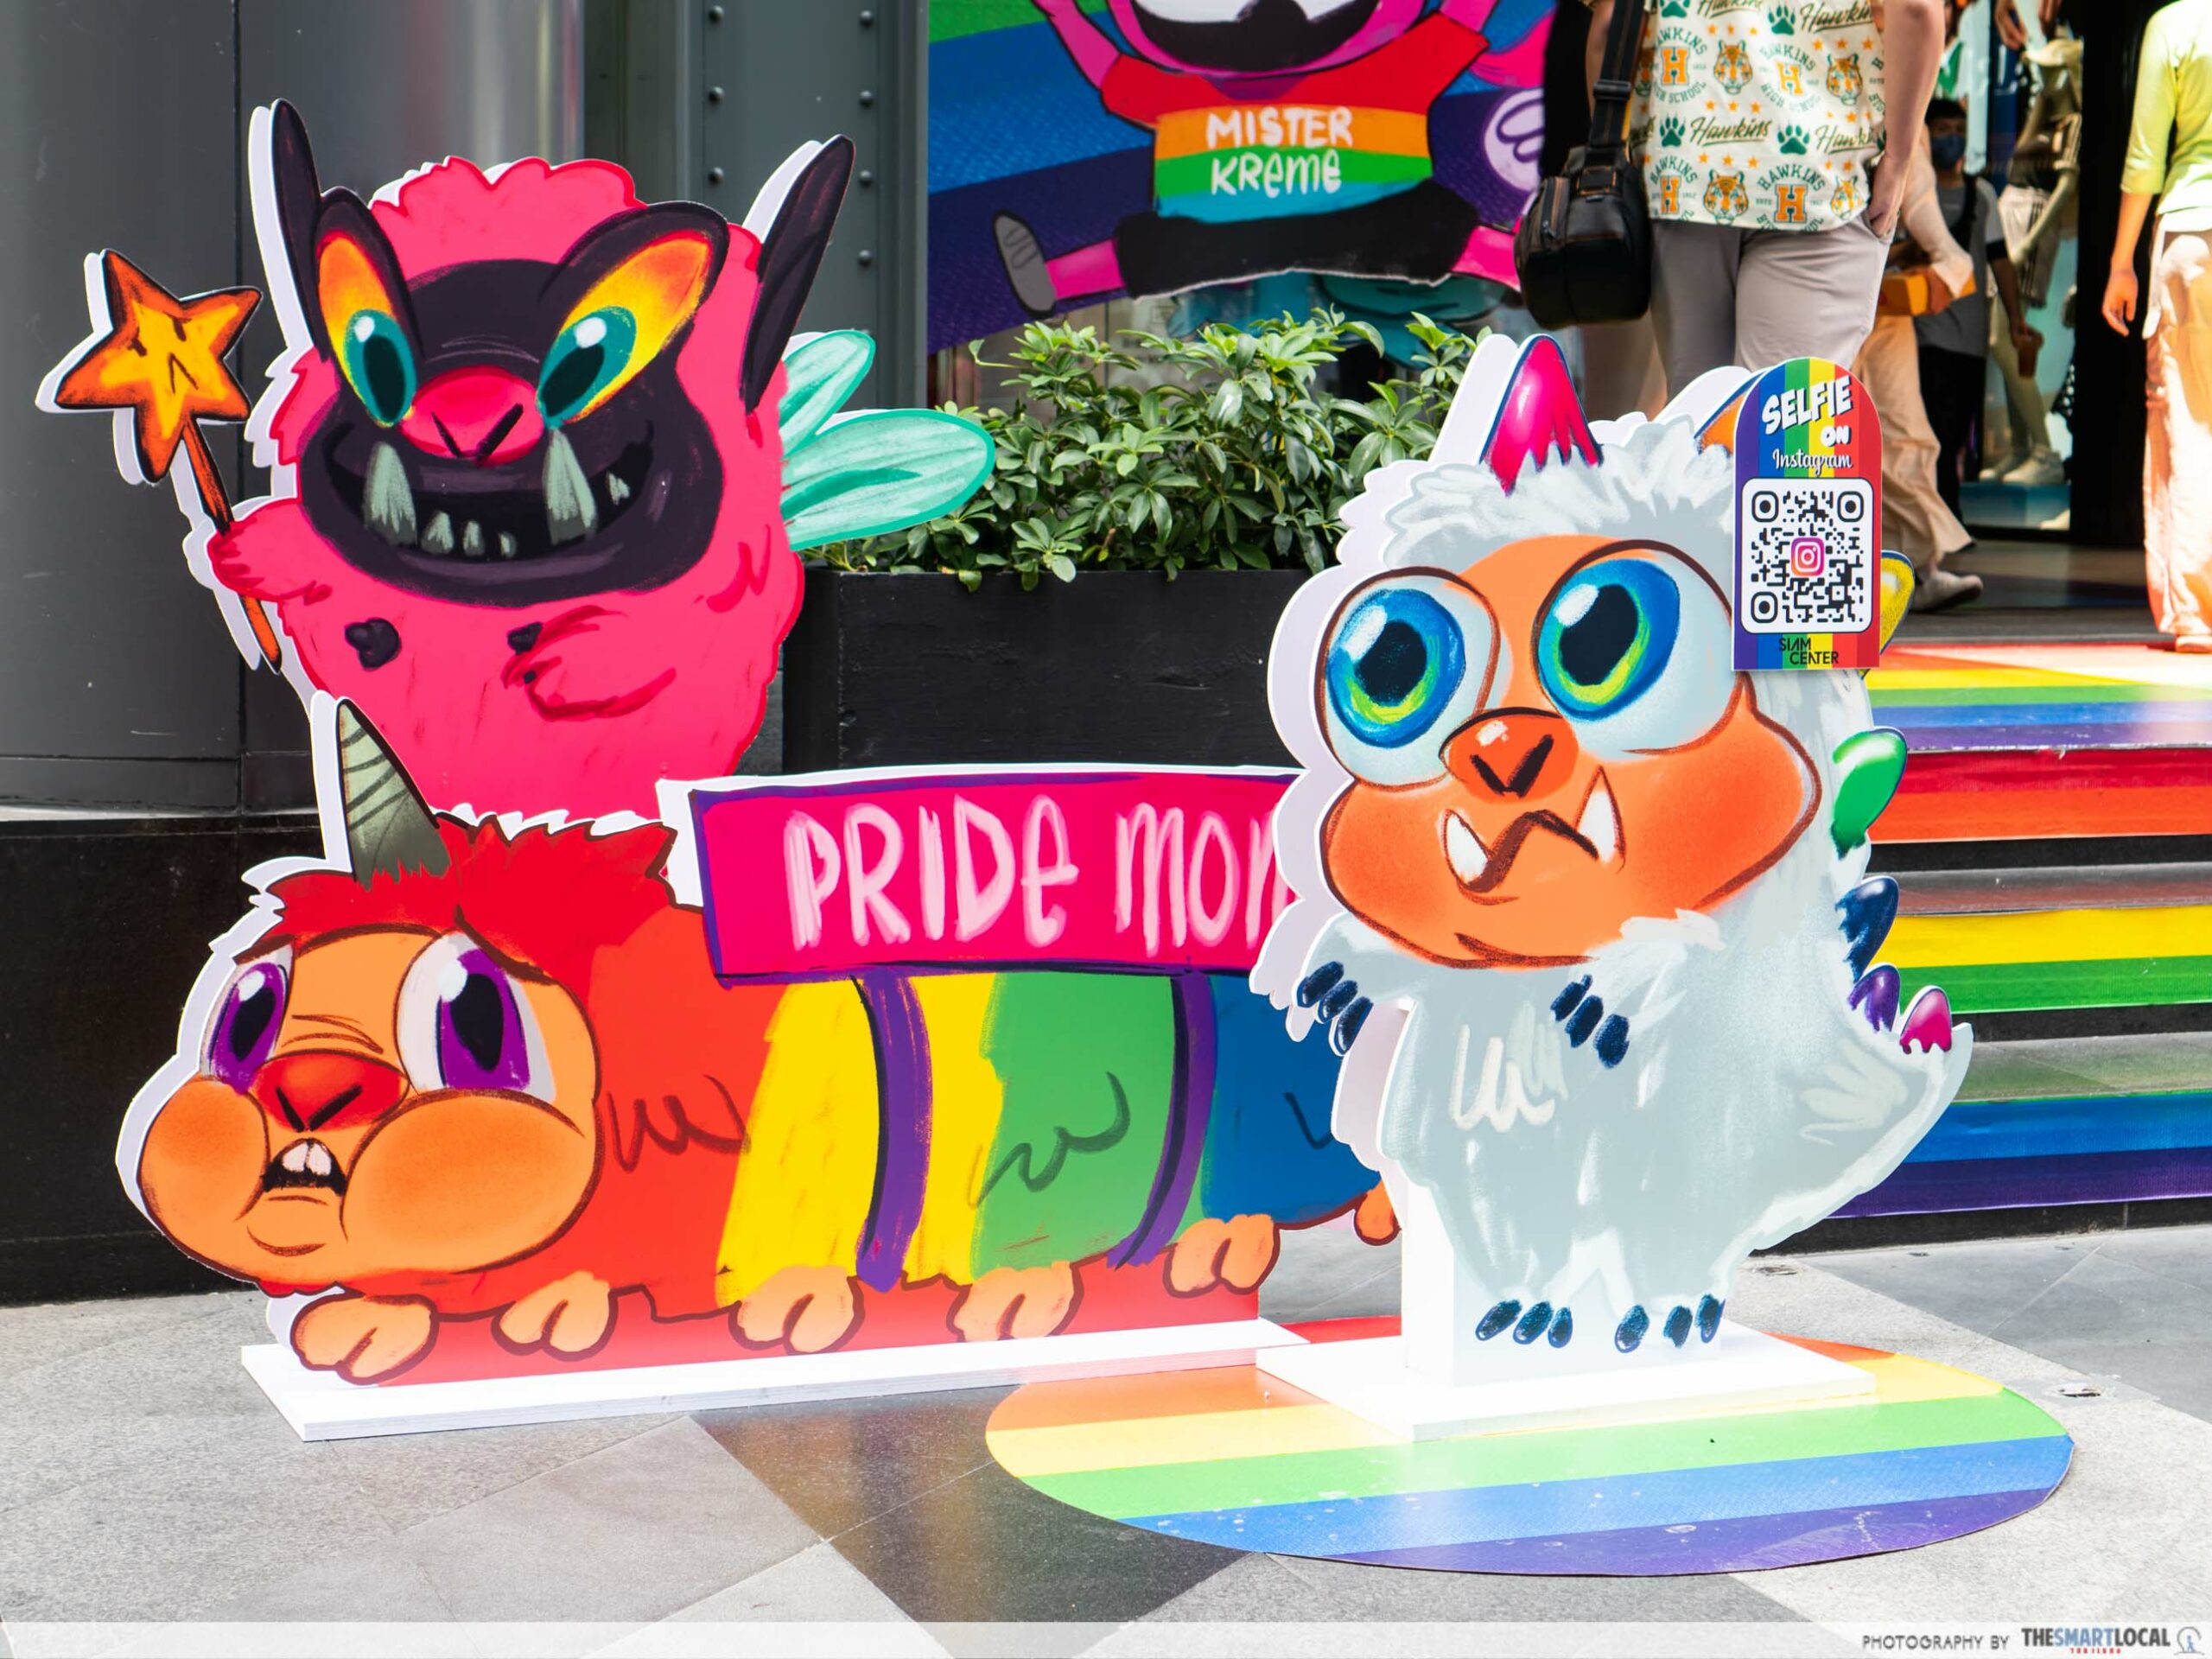 Cute monster characters designed by local artist MRKREME displayed during Pride Month in Siam Center